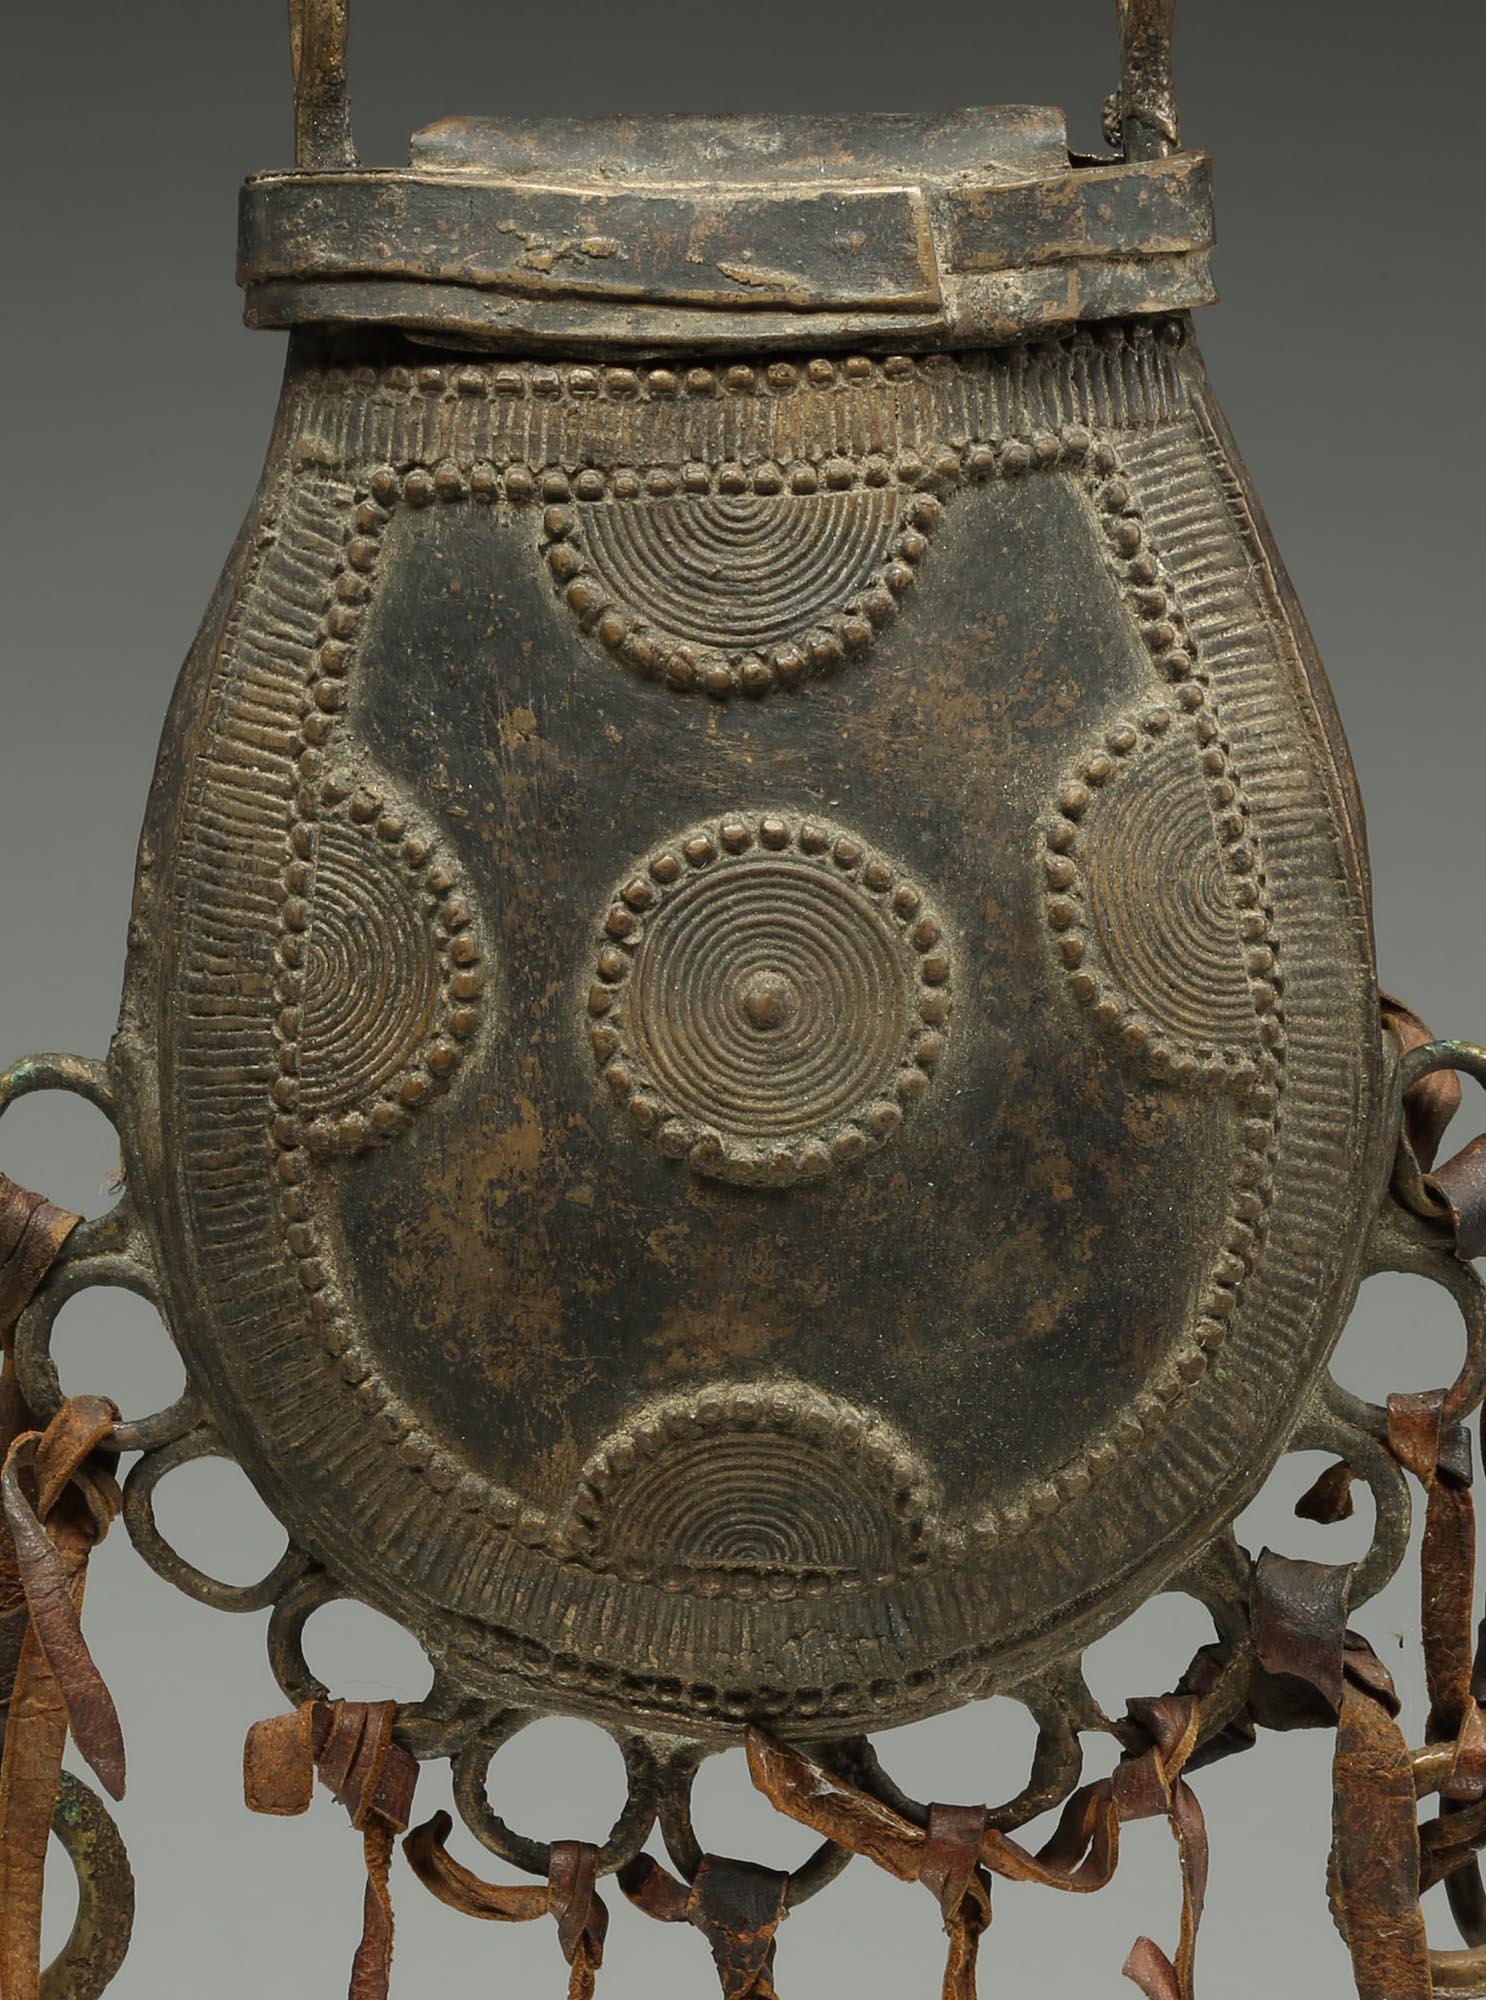 Vintage Nupe of Nigeria thinly cast hollow bronze purse or container, probably created by the lost wax process with attached bronze bells and rings. Hollow with fine overlaid designs. Dulled from age, rear shows some polish from use, early 20th